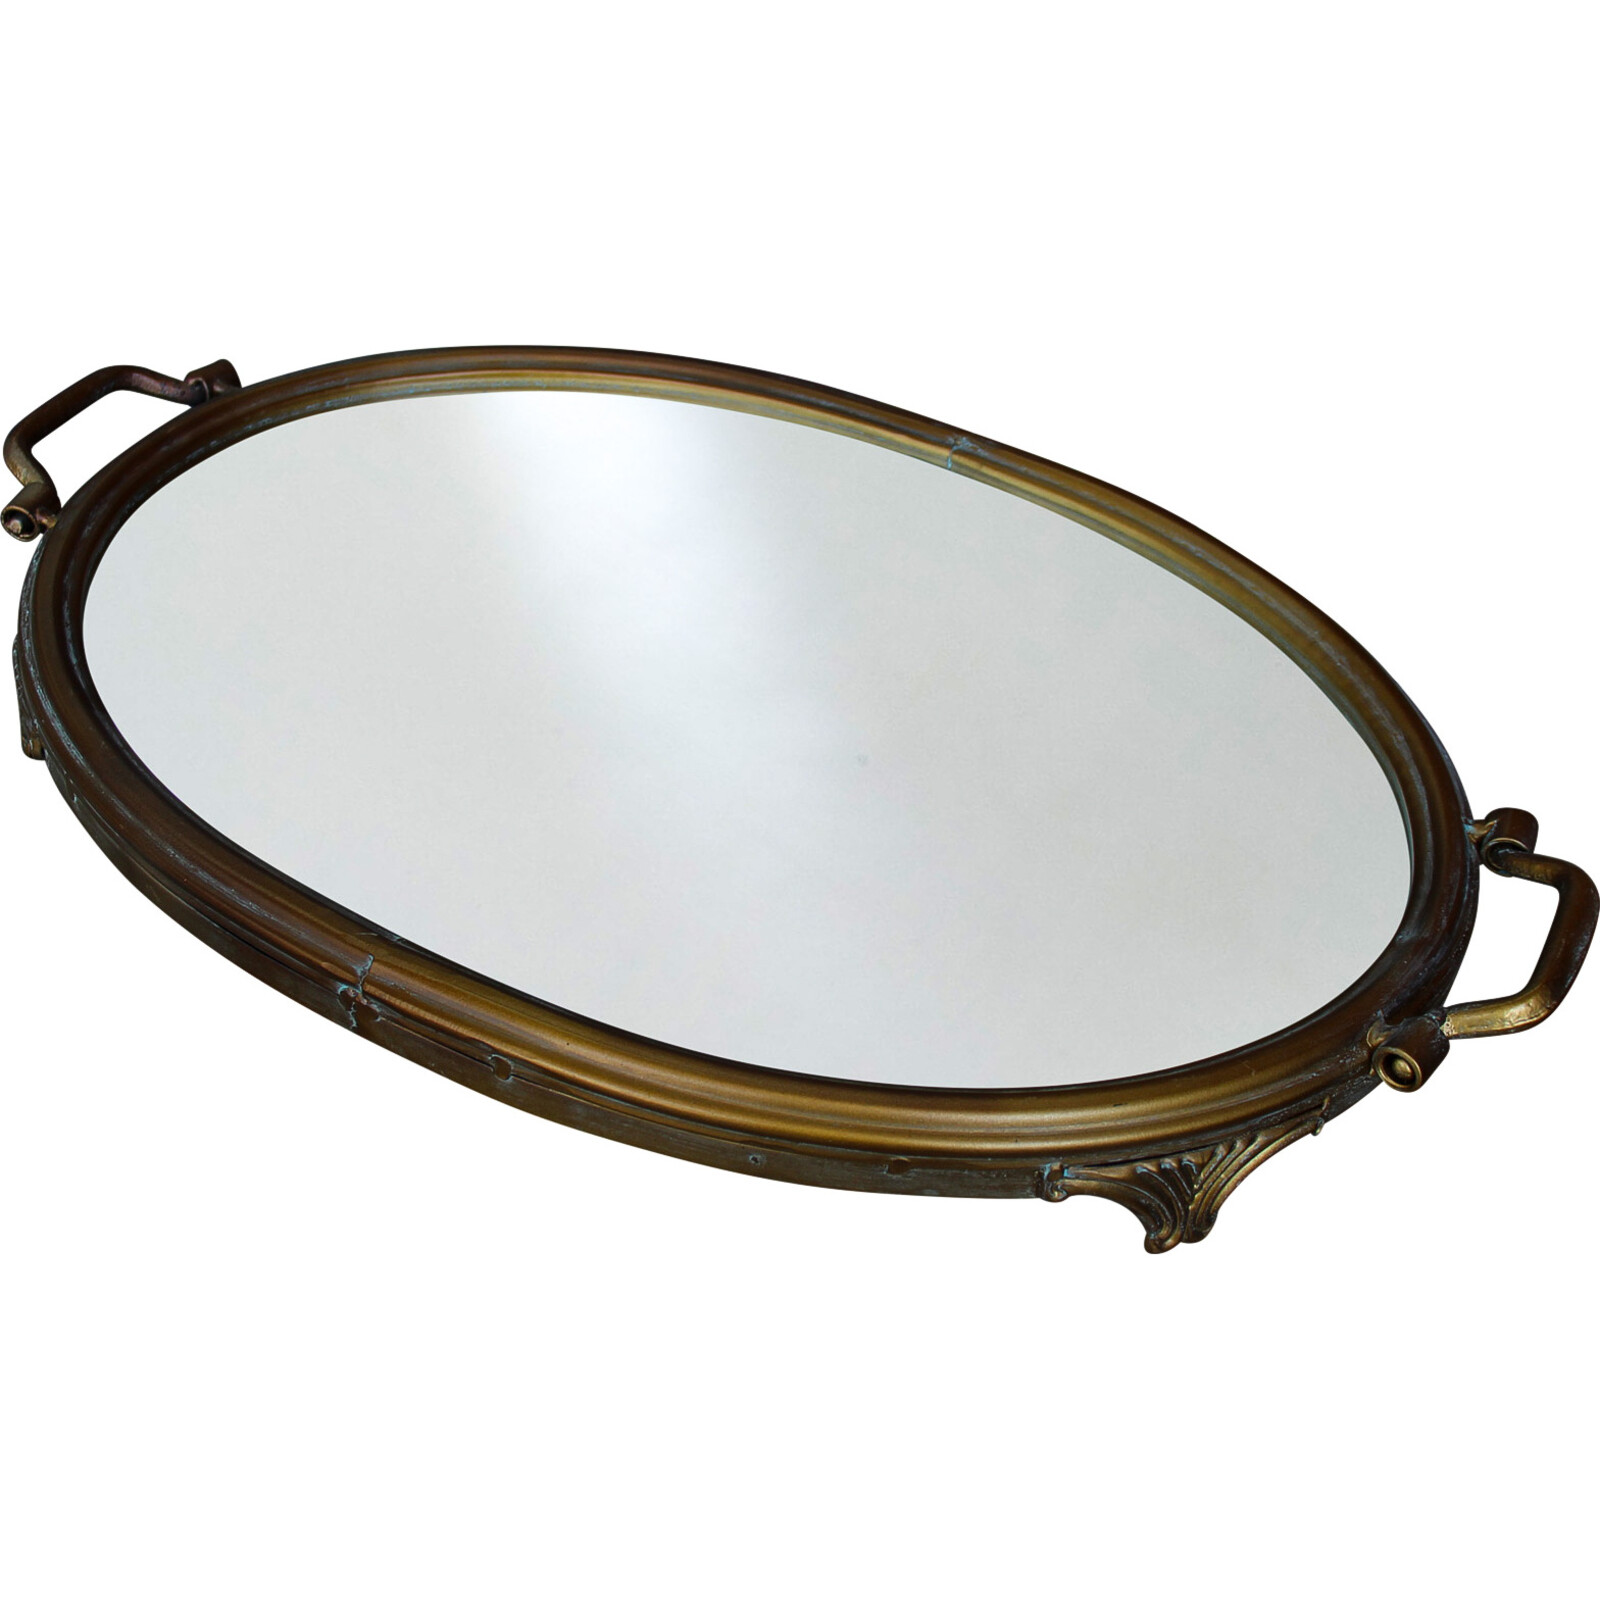 Tray Oval Antique Brass 